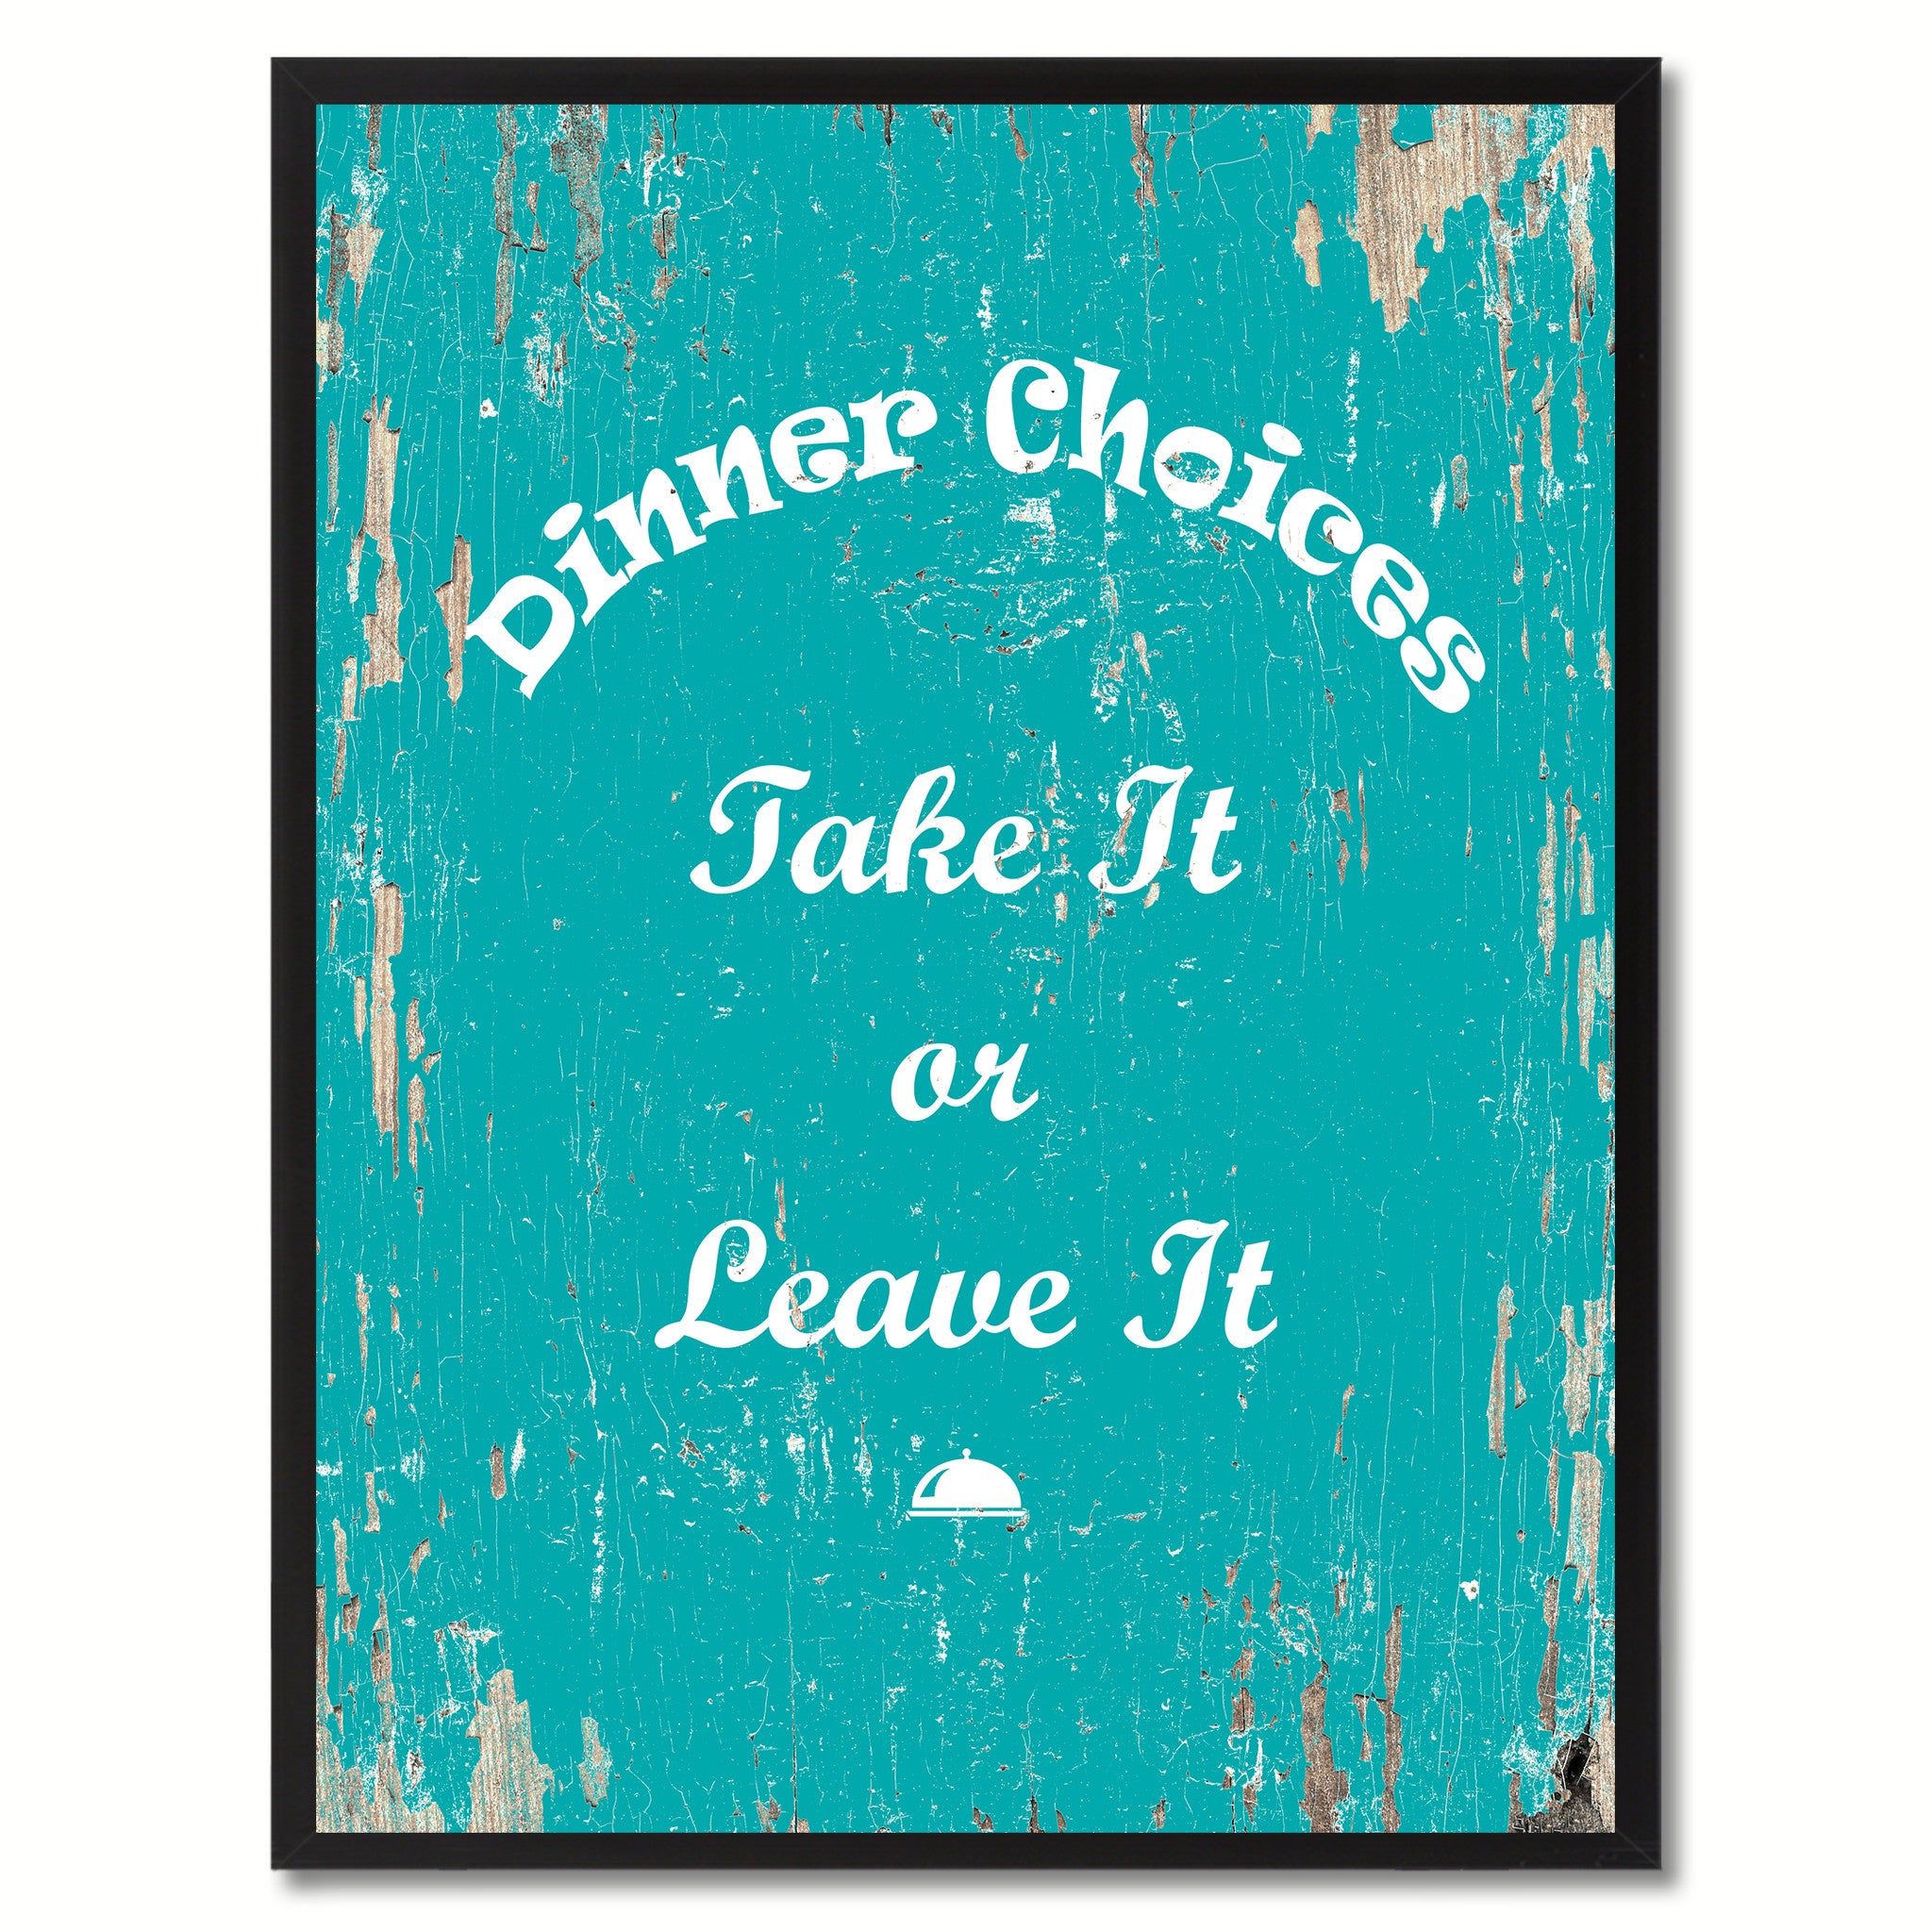 Dinner Choices take it or leave it  Quote Saying Gift Ideas Home Decor Wall Art